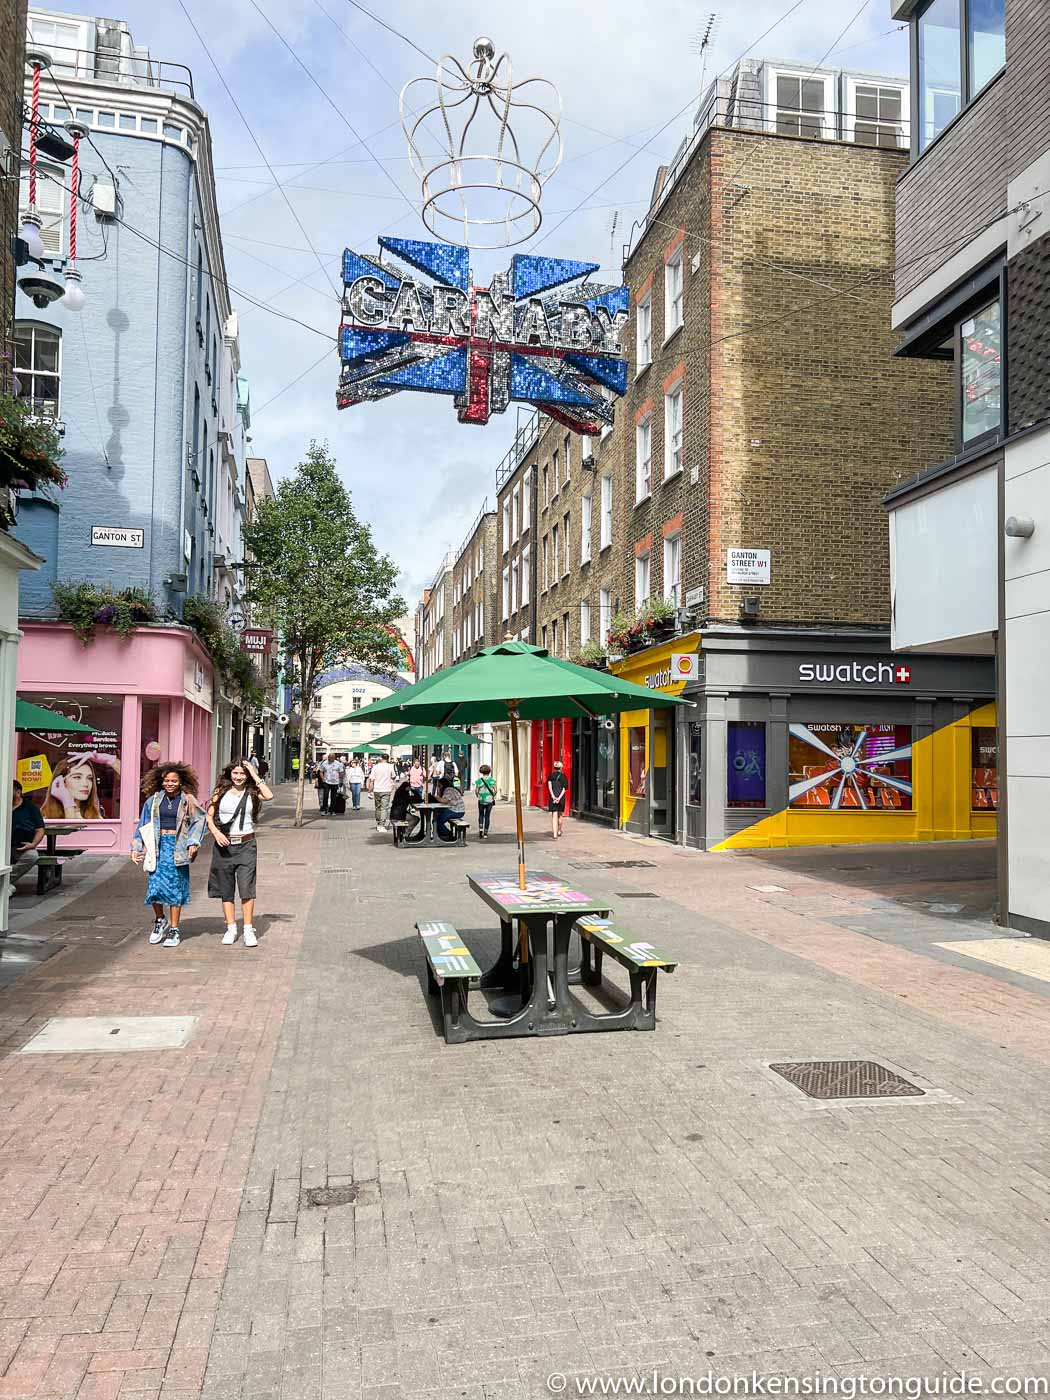 The area guide on Soho. Soho is one of the capital's most lively neighbourhoods and one not to miss out when in London. Great for nightlife, shopping and food. Read for more.